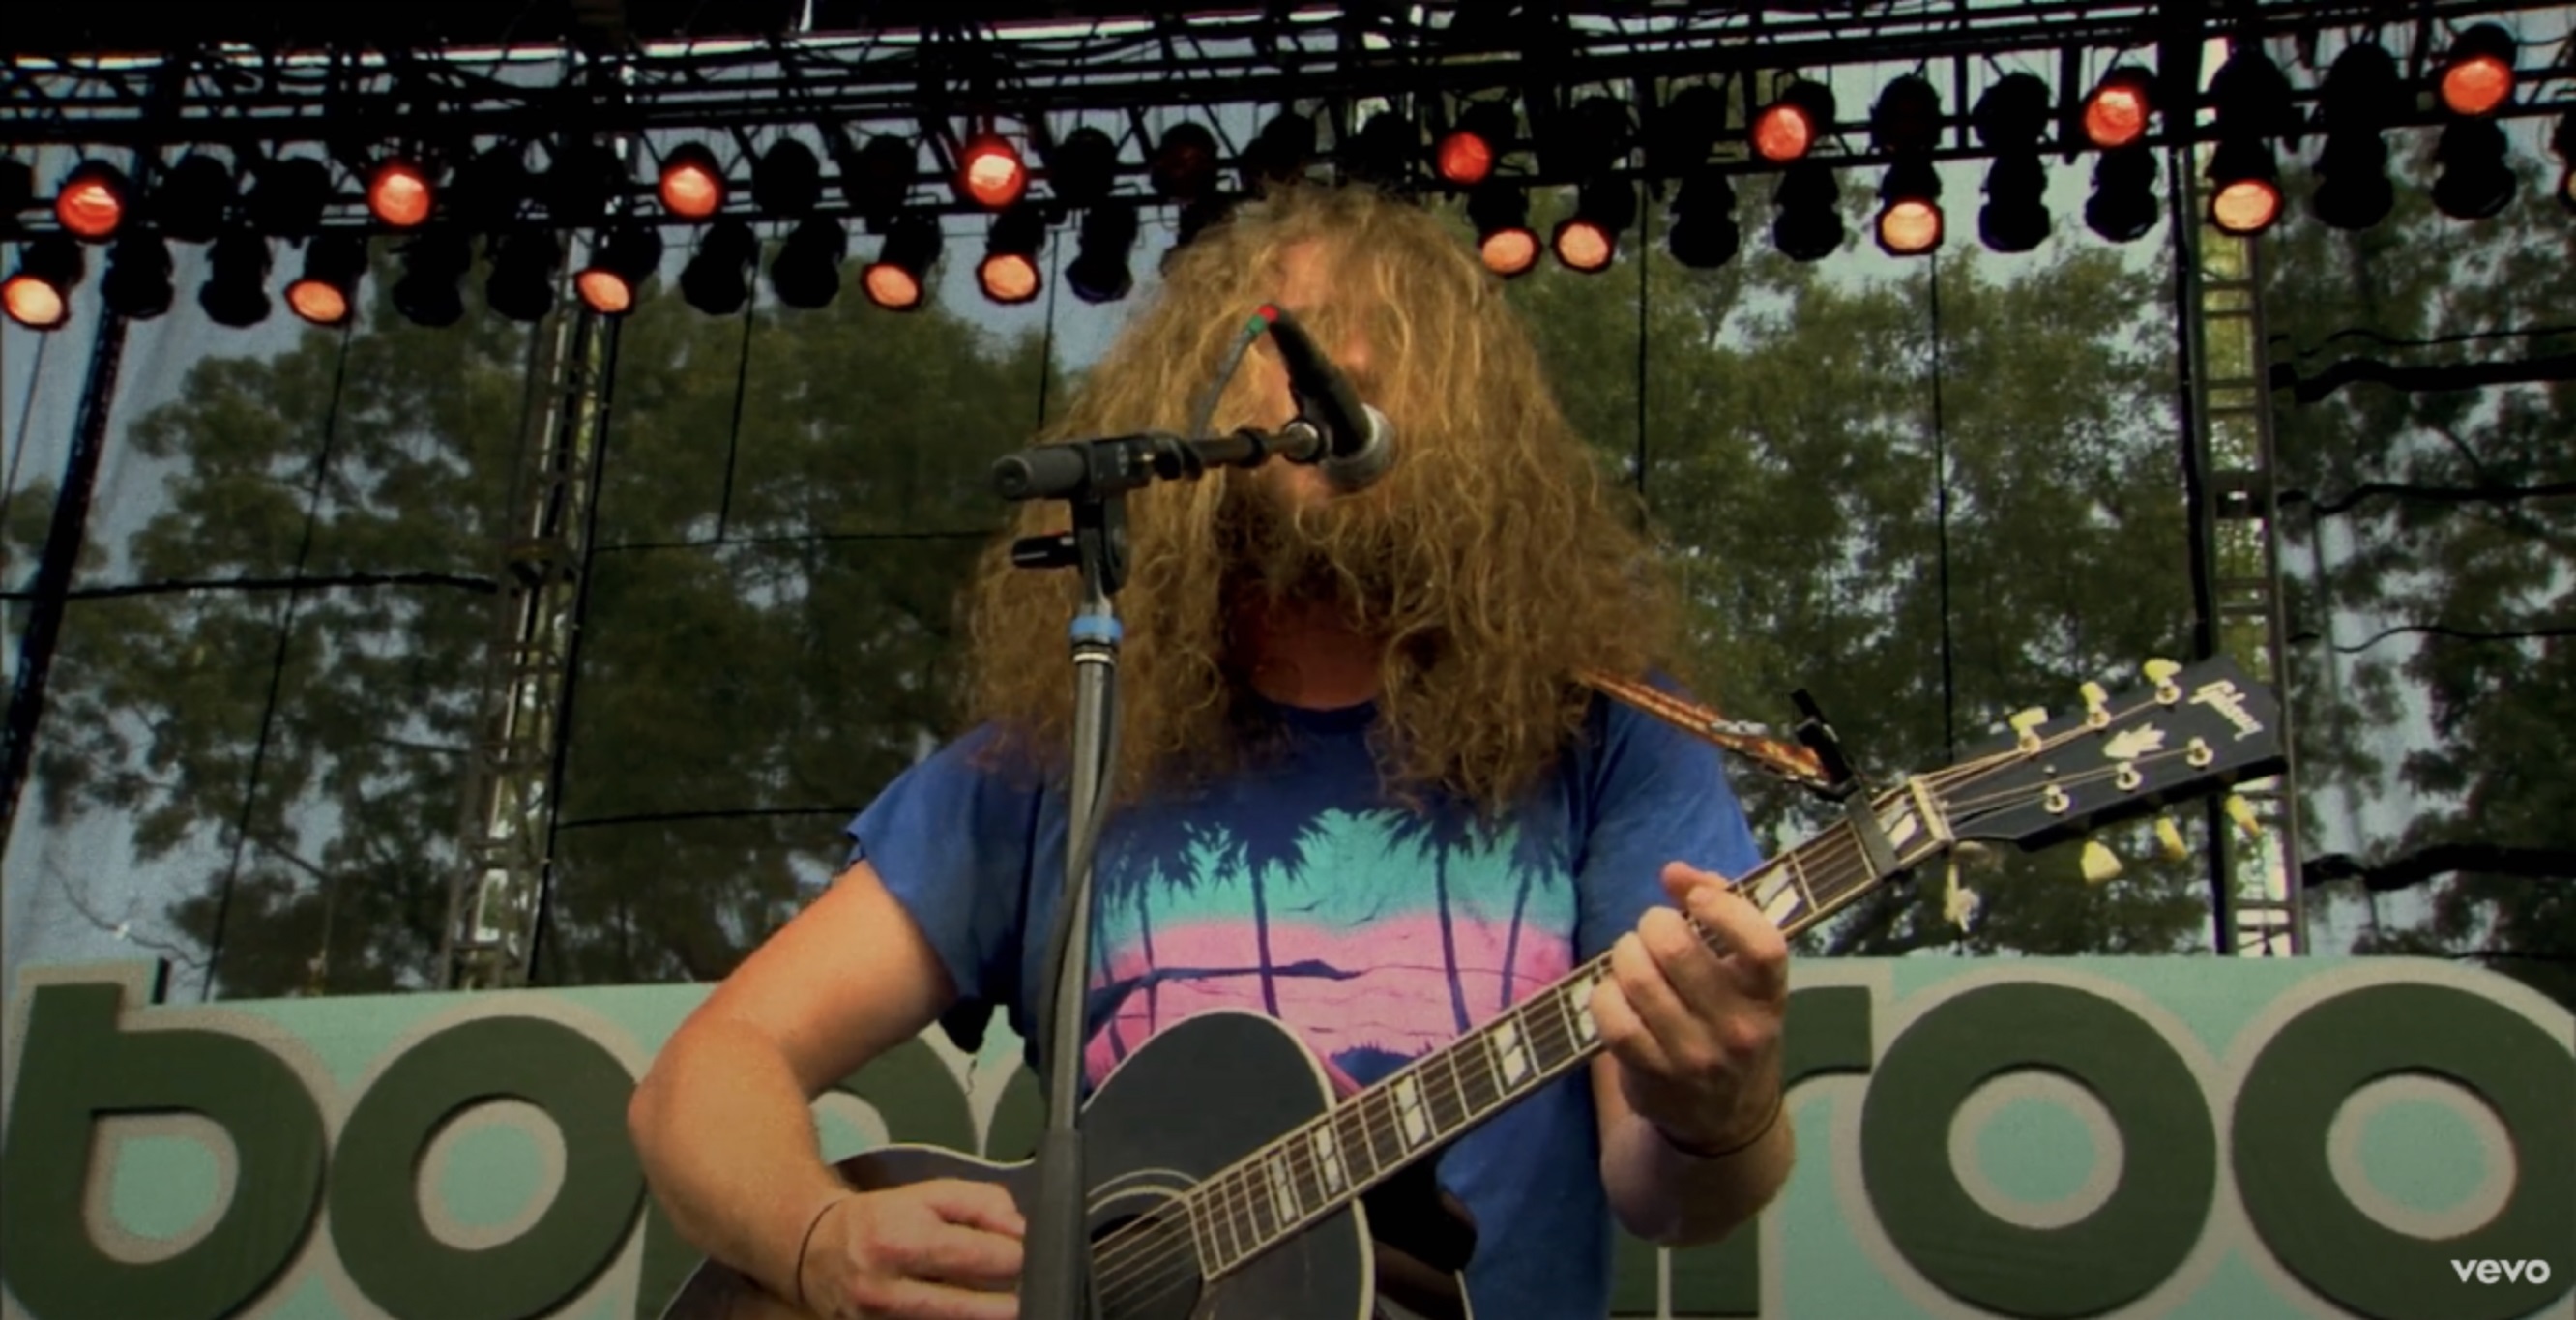 My Morning Jacket Bonnaroo 2004 doc premieres tonight; new live performance video from doc out now